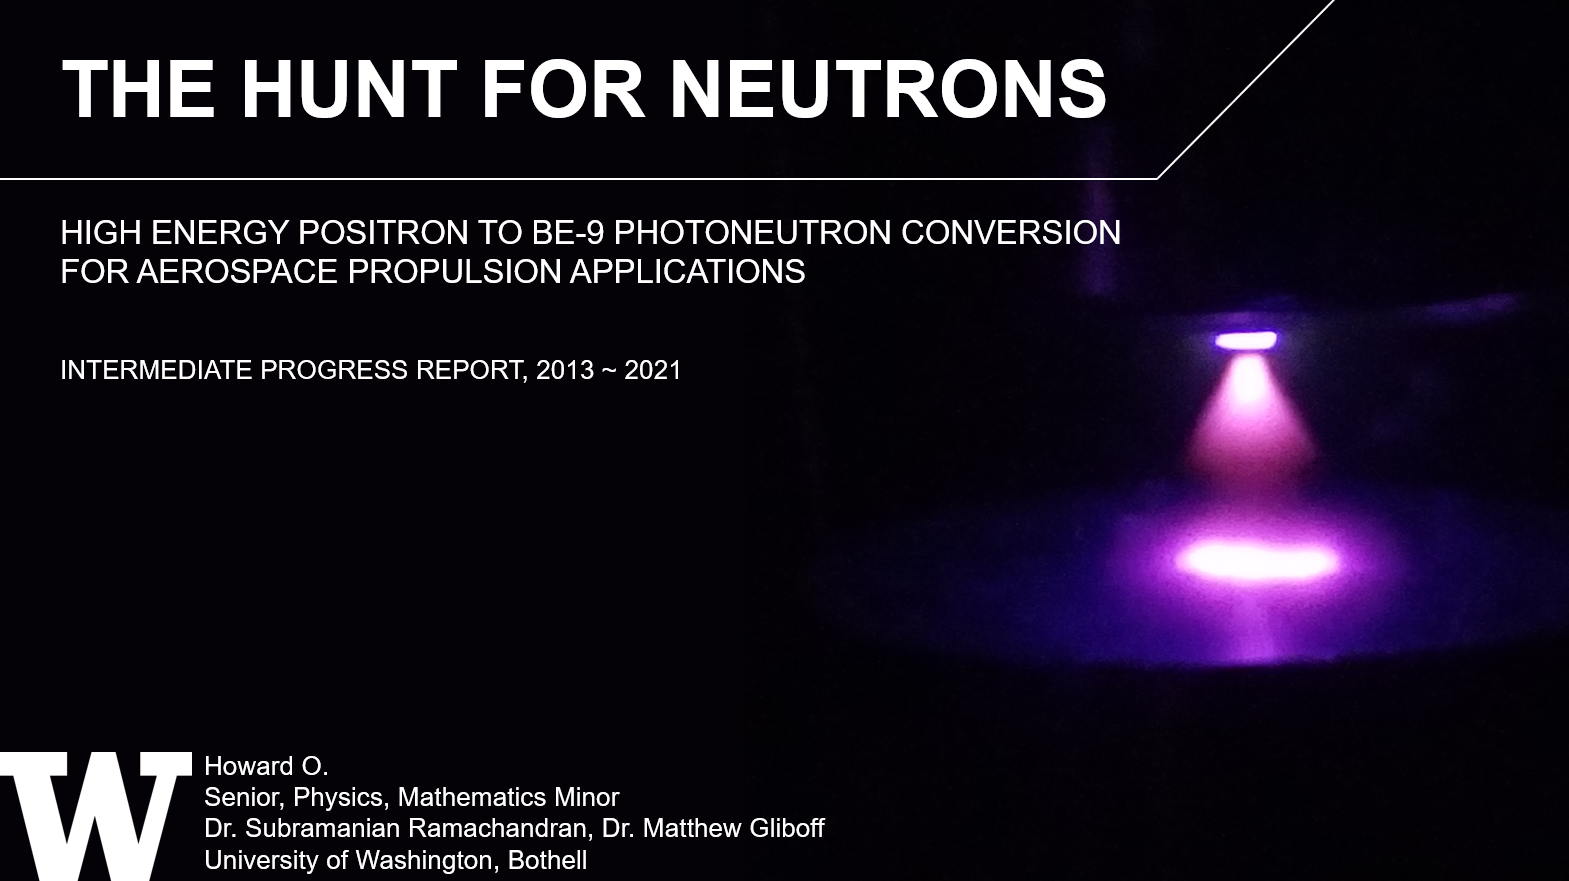 The Hunt for Neutrons: High Energy Positron to Be-9 Photoneutron Conversion for Aerospace Propulsion Applications Poster